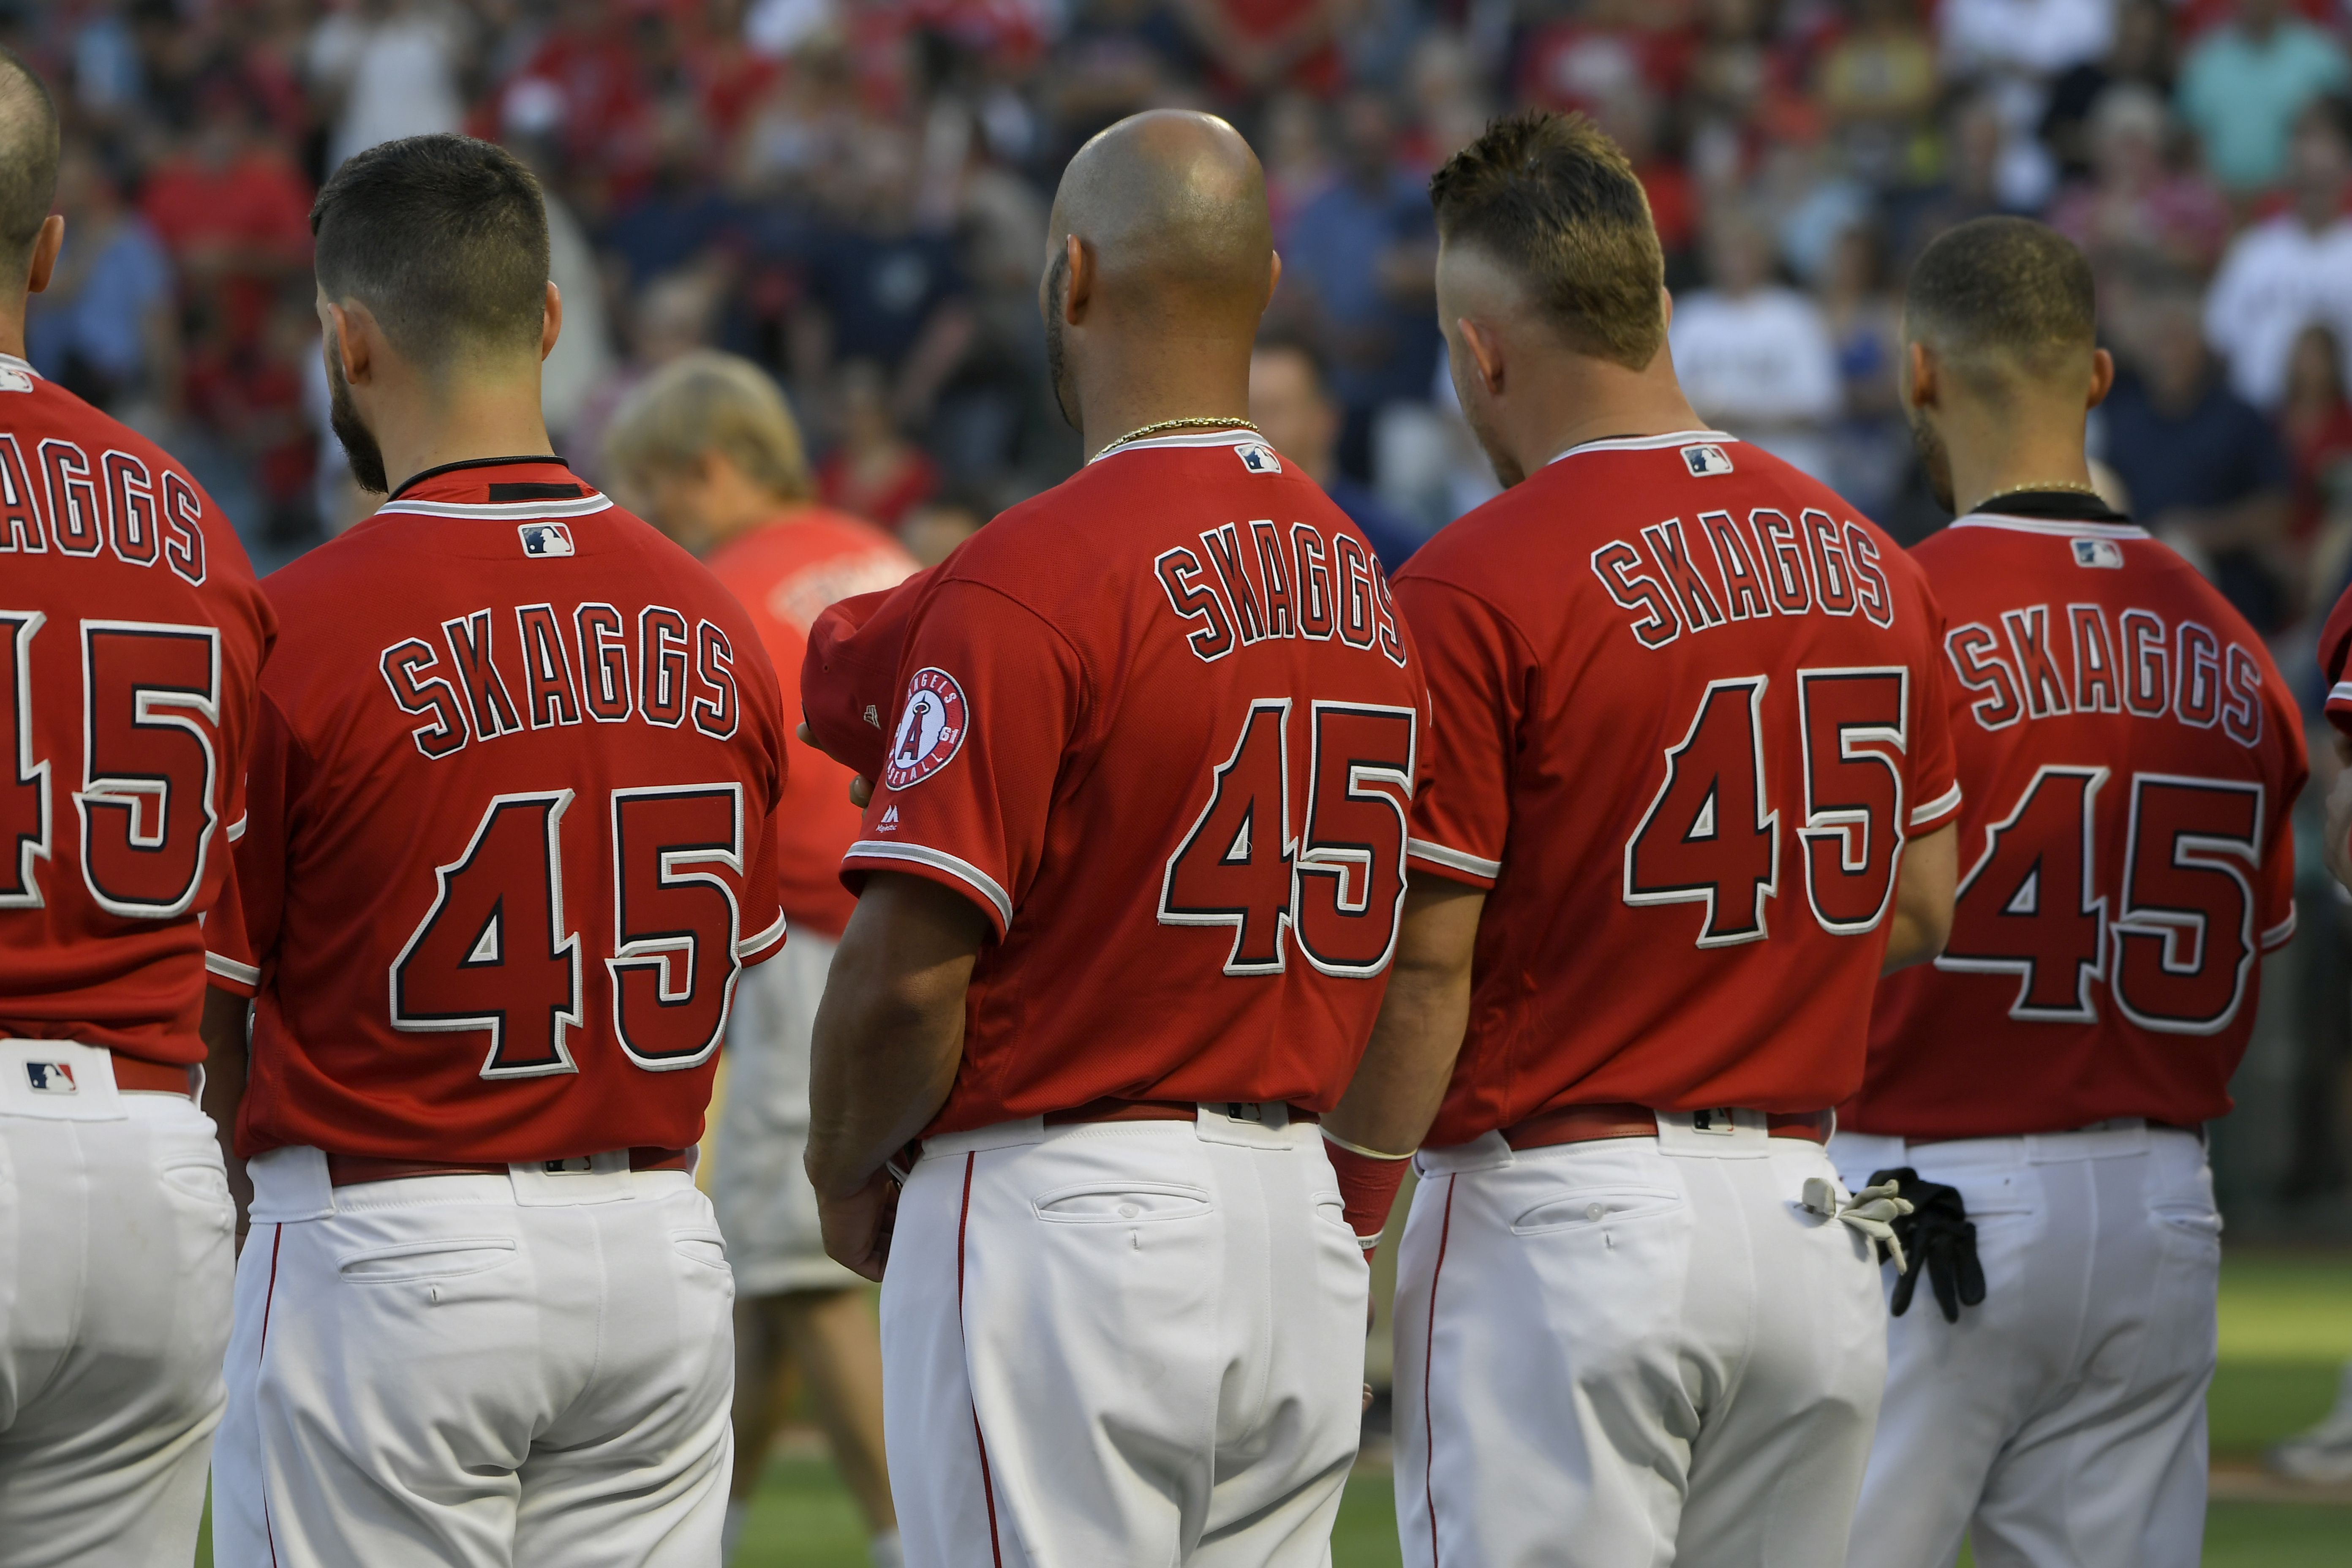 Mike Trout Honors Tyler Skaggs at All-Star Game with No. 45 Jersey